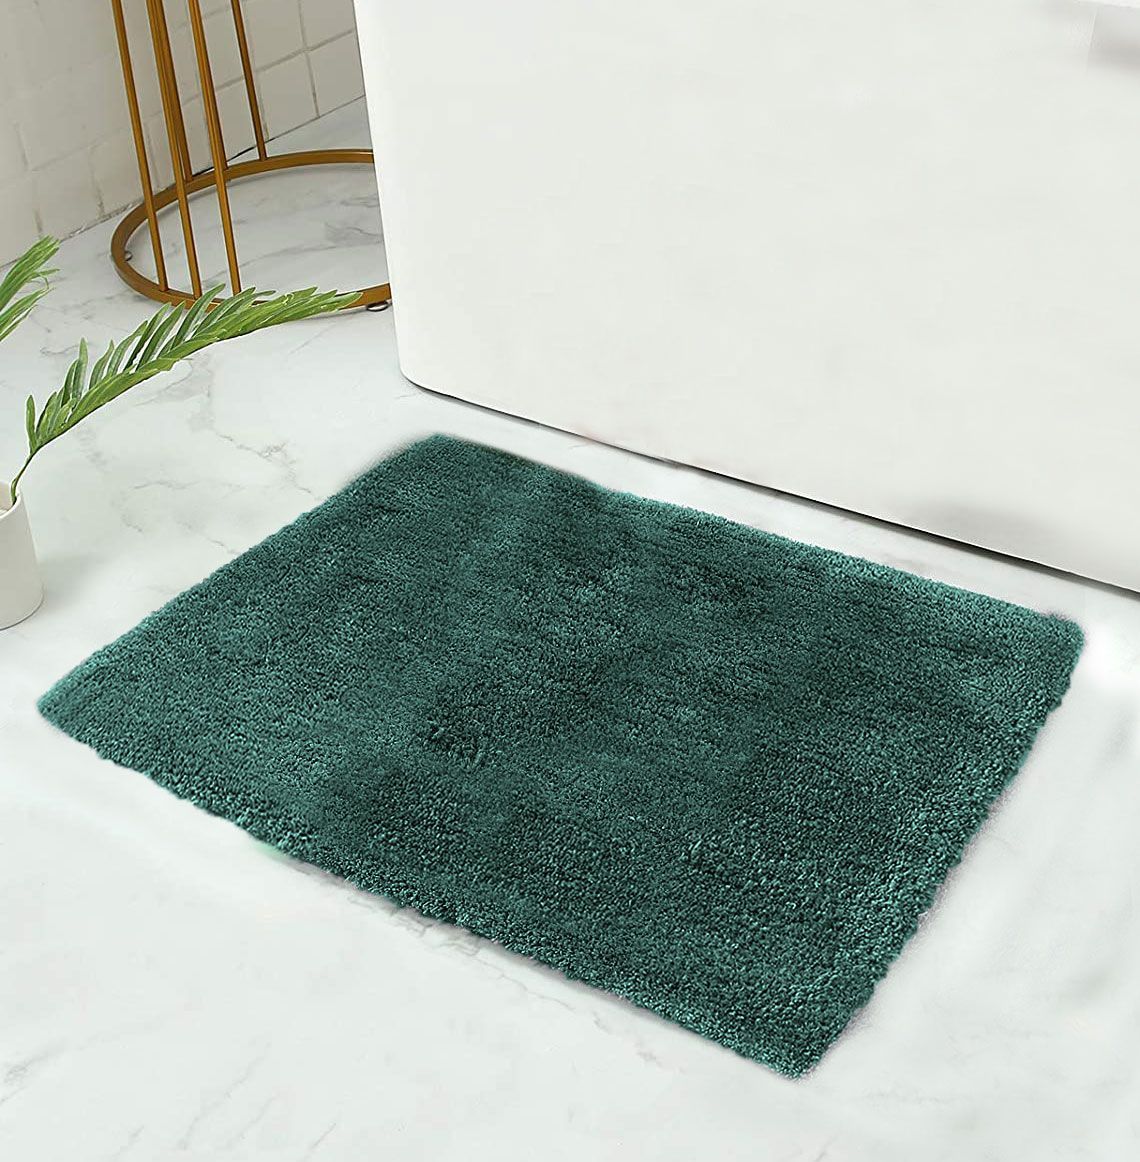 Mosobam 1000 GSM Hotel Luxury XL Bath Mat 28X44, Seagrass Green, Oversized  Bath Rug, Viscose Made from Bamboo - Turkish Cotton